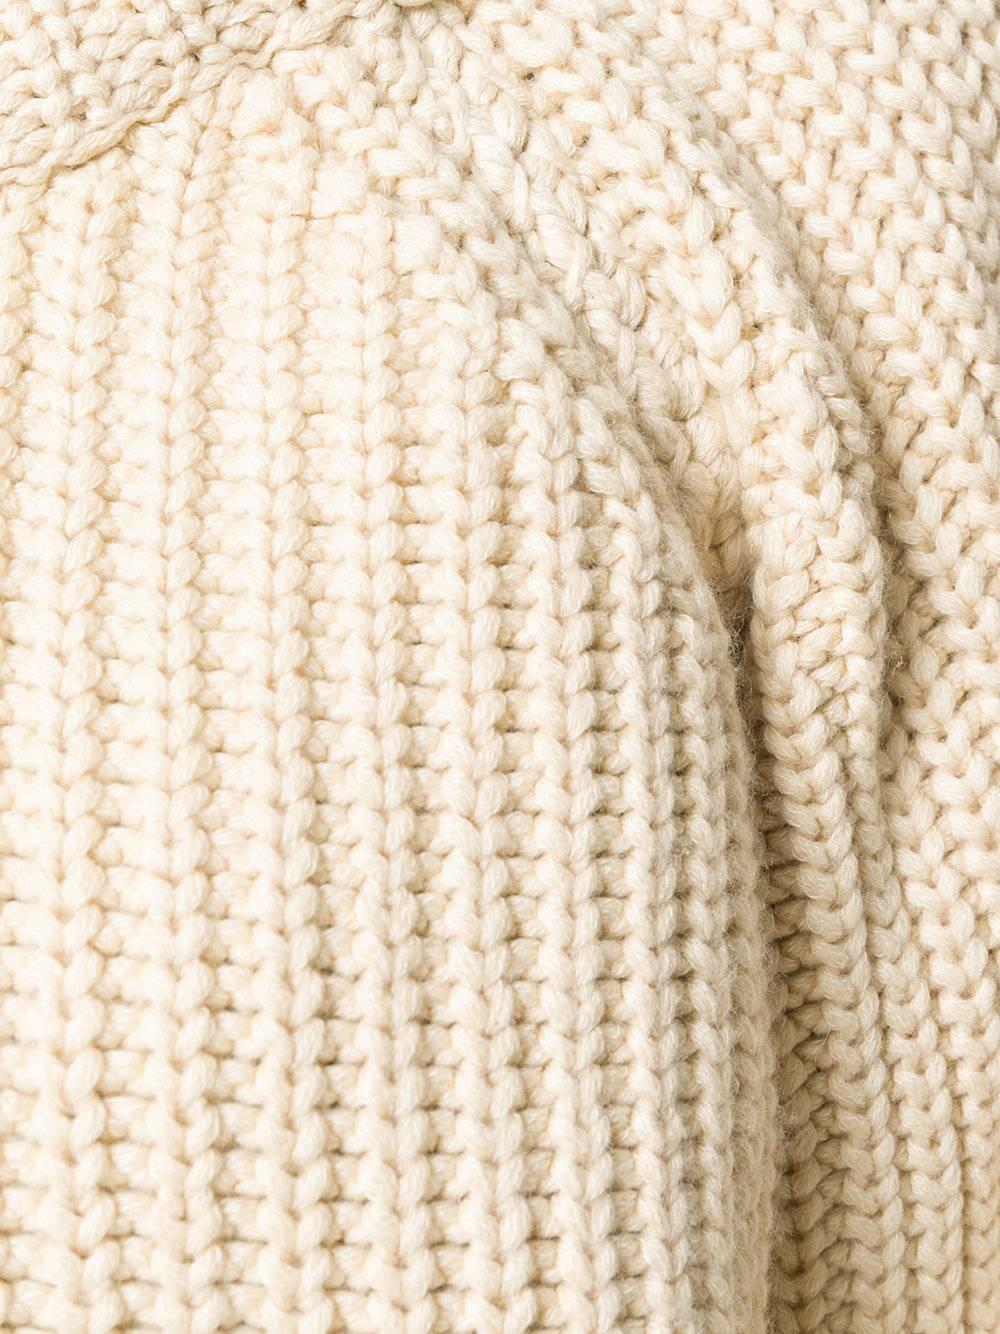 Crafted from a cream beige cashmere-cotton blend, this Hermes chunky jumper features a ribbed crew neck, long sleeves and ribbed cuffs. Perfect for long winter days.

Colour: Cream

Composition: 64% Cashmere, 34% Cotton

Size: 42 FR / 46 IT / 14 UK